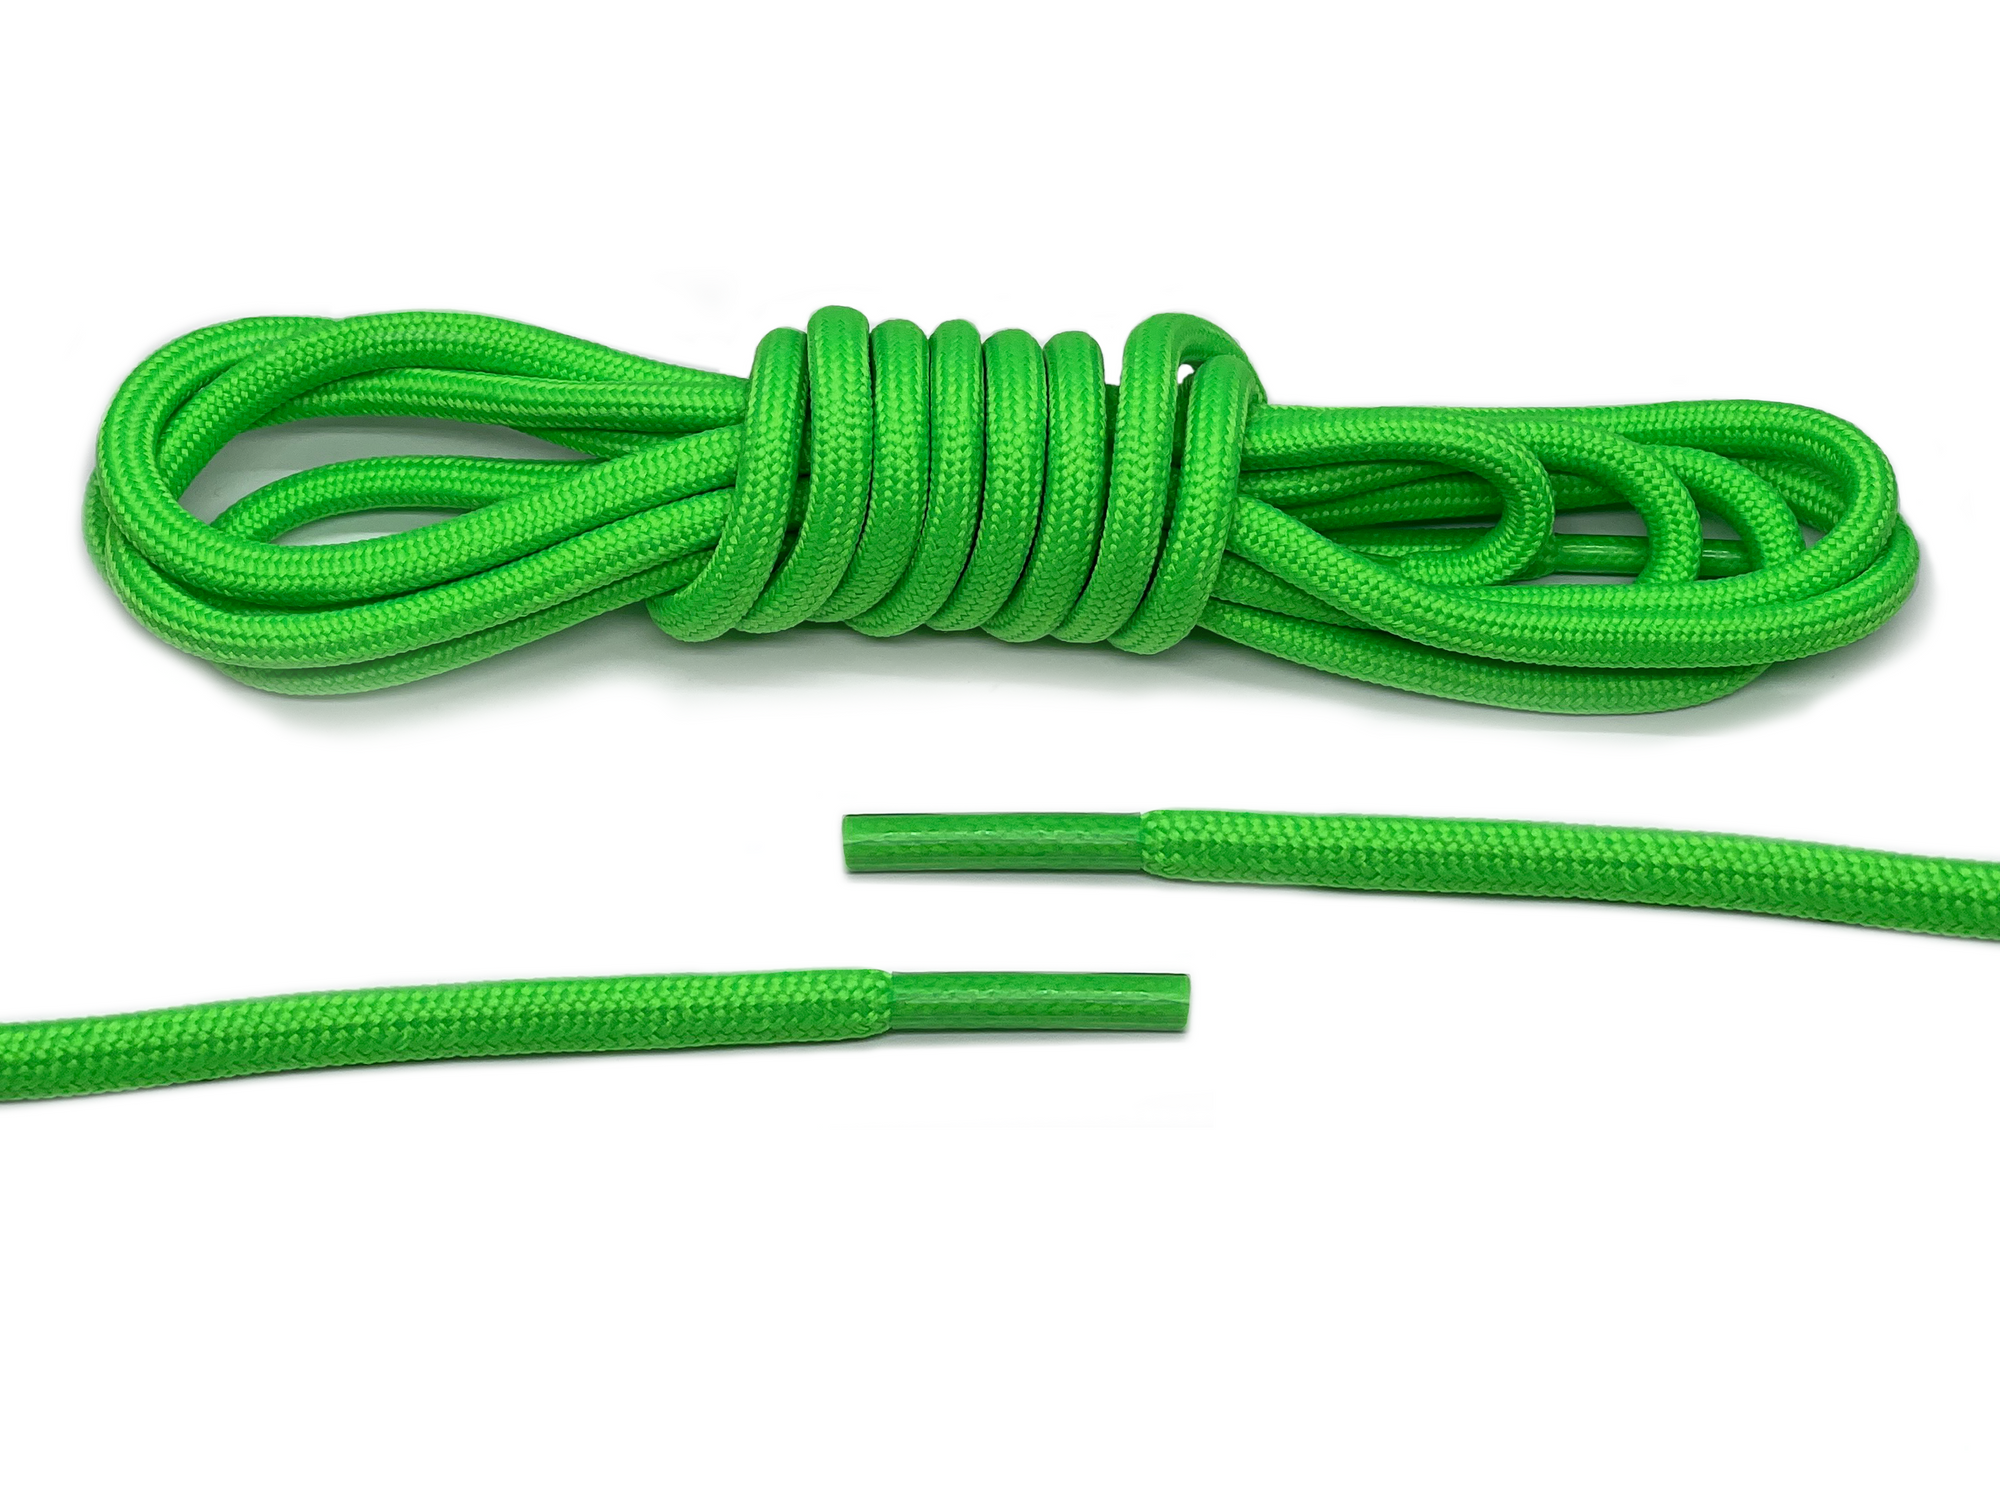 The Fluro Green Round Shoe Lace - Belaced